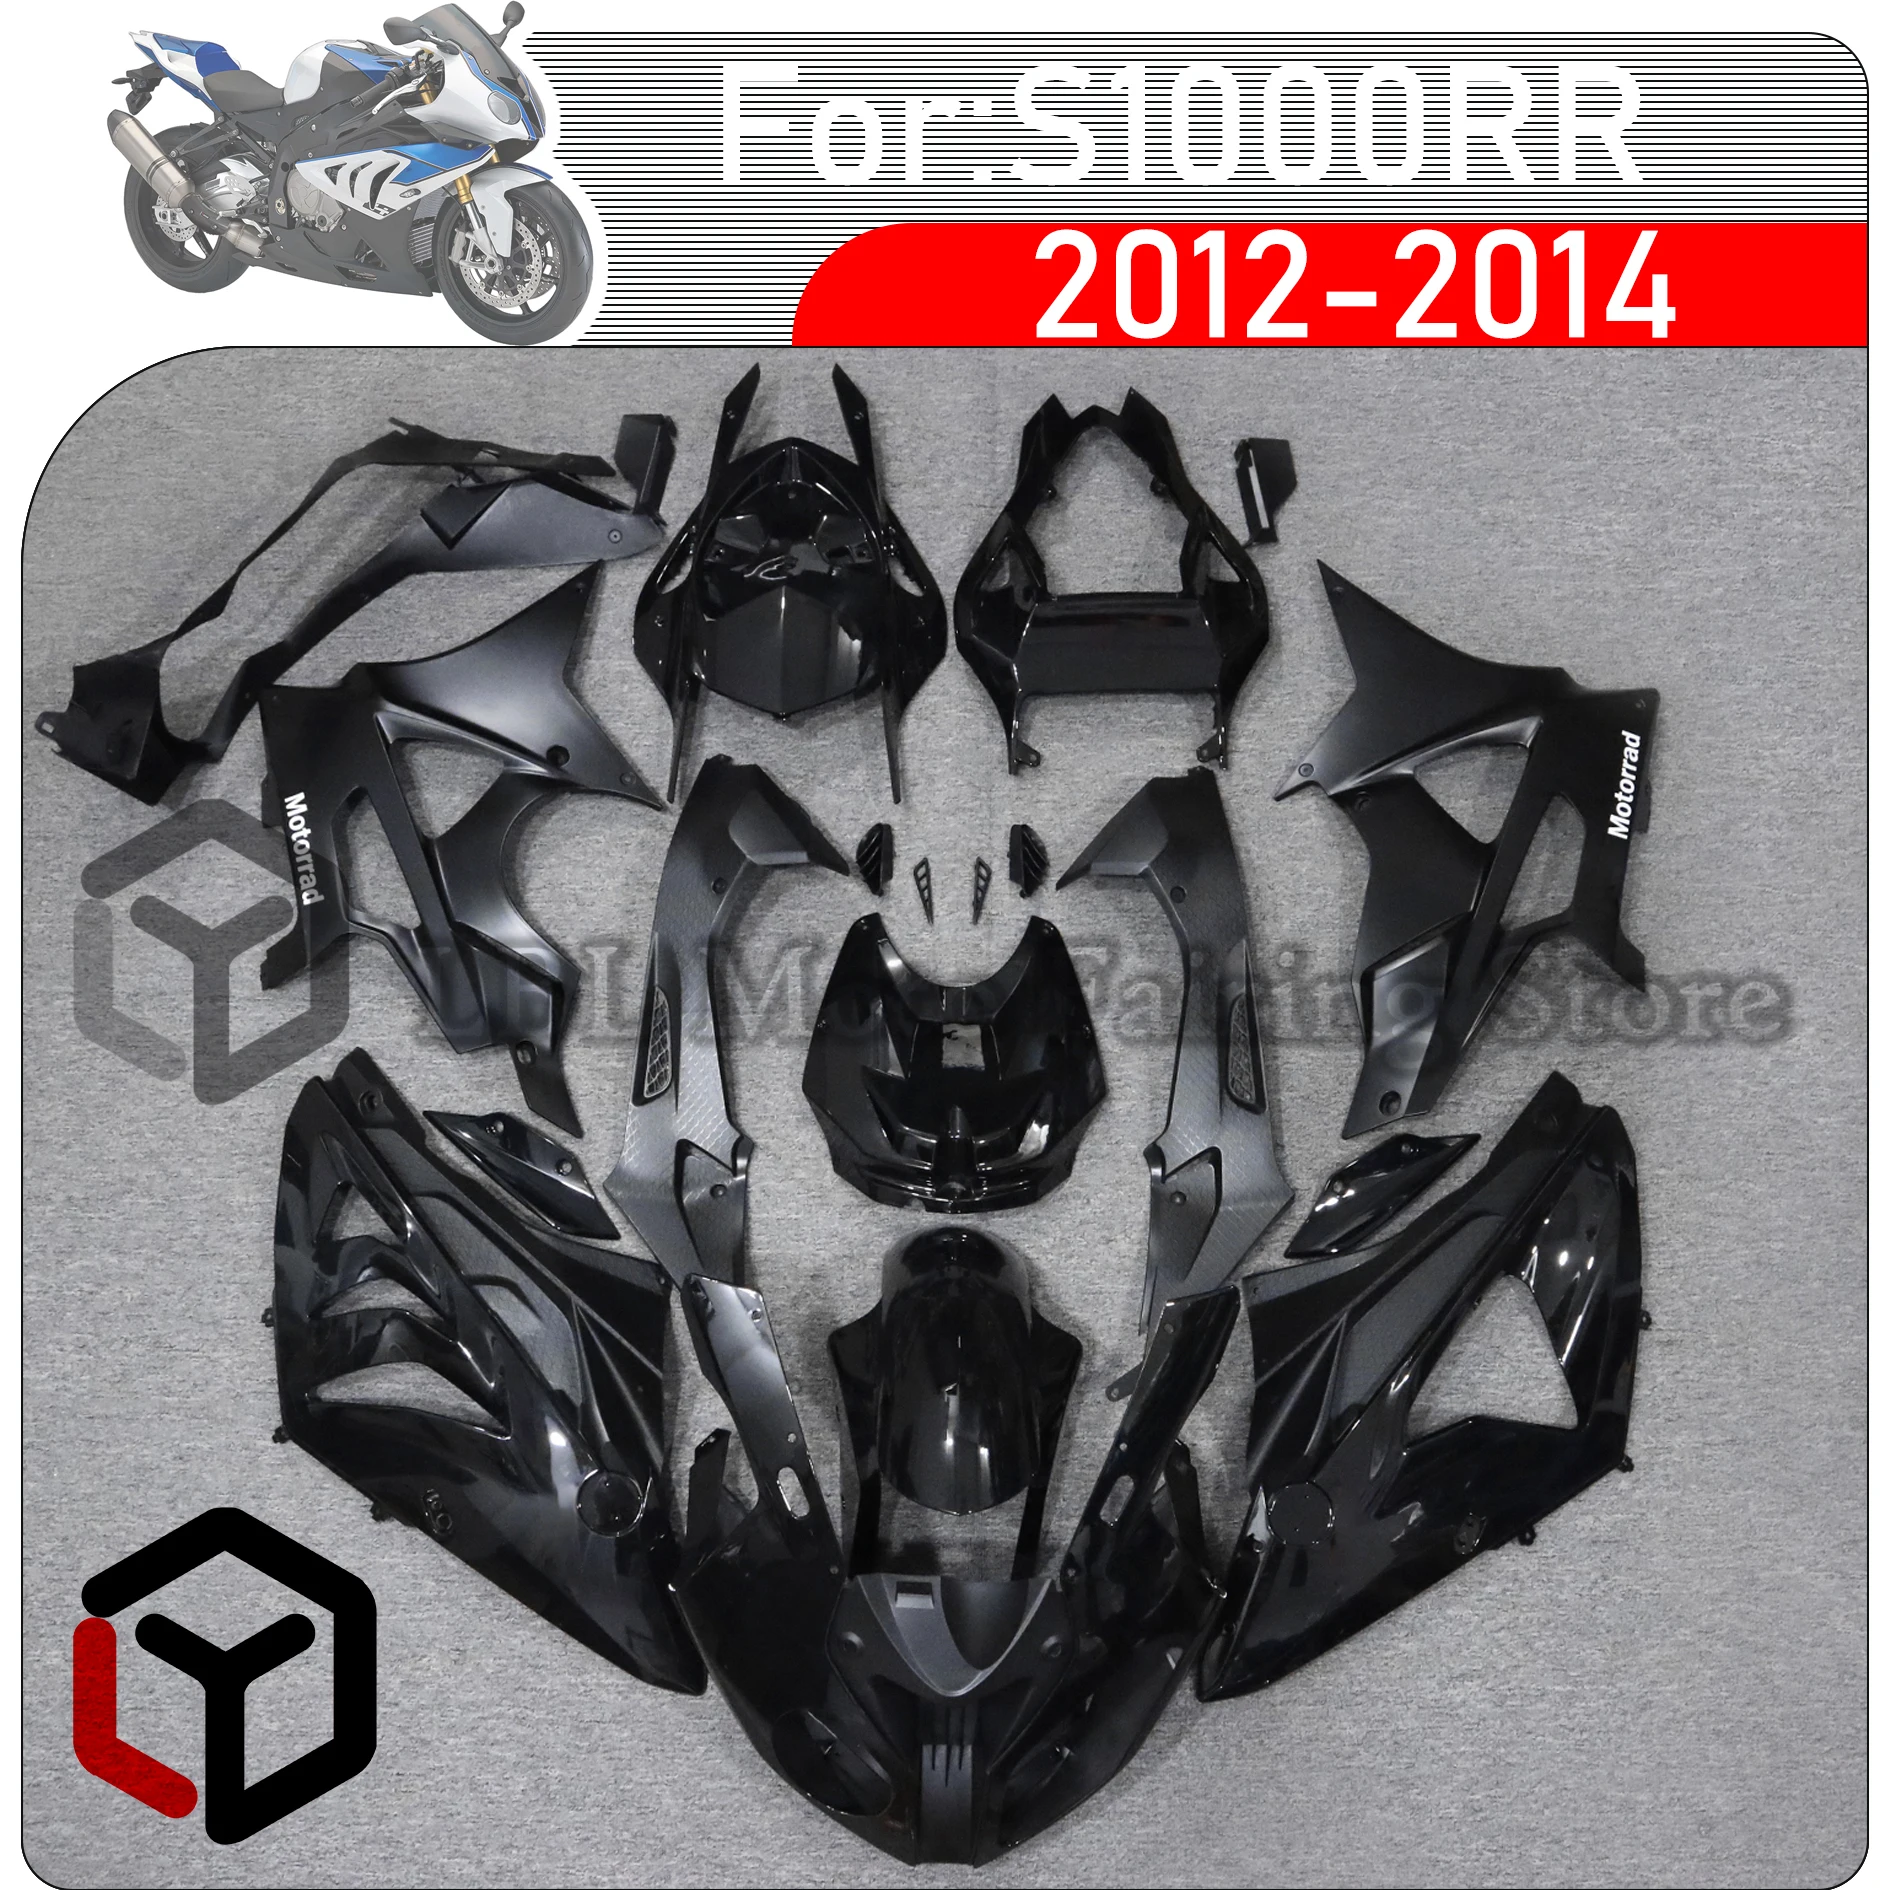 

Motorcycle Fairings Kit Fit For BMW S 1000RR S1000 RR S1000RR 2012-2014 Bodywork Set High Quality ABS Injection Full Fairing